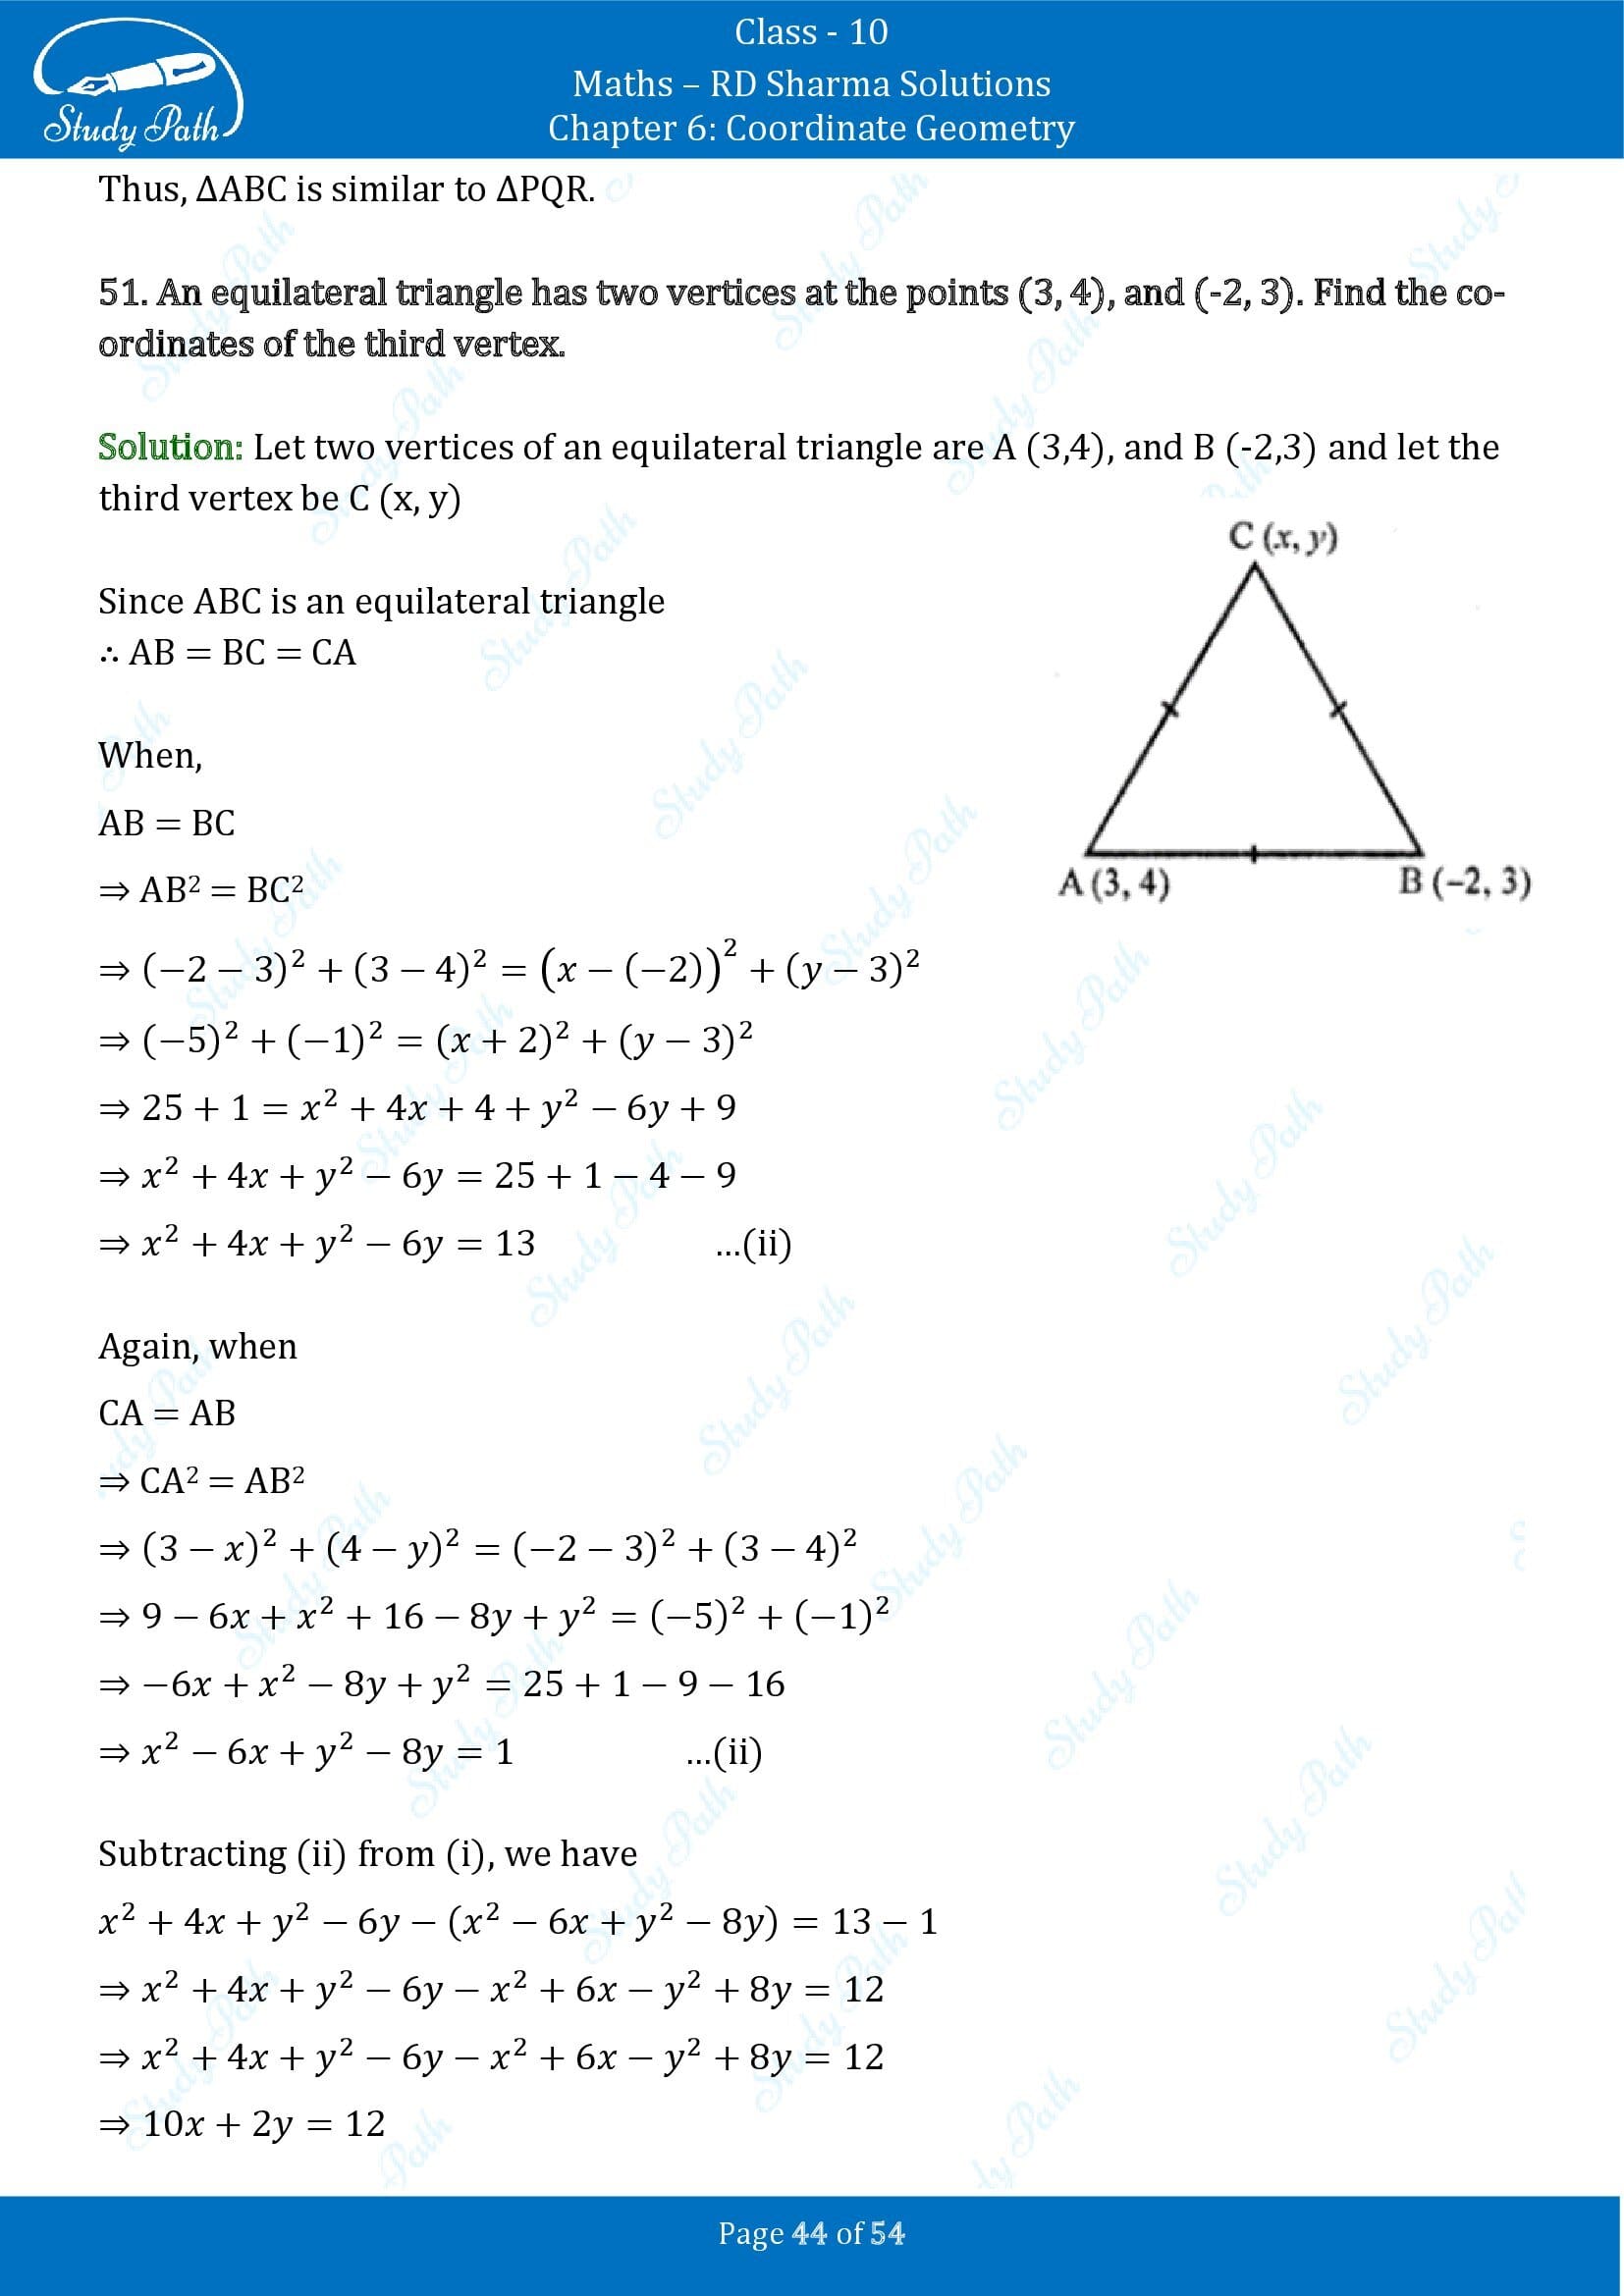 RD Sharma Solutions Class 10 Chapter 6 Coordinate Geometry Exercise 6.2 0044